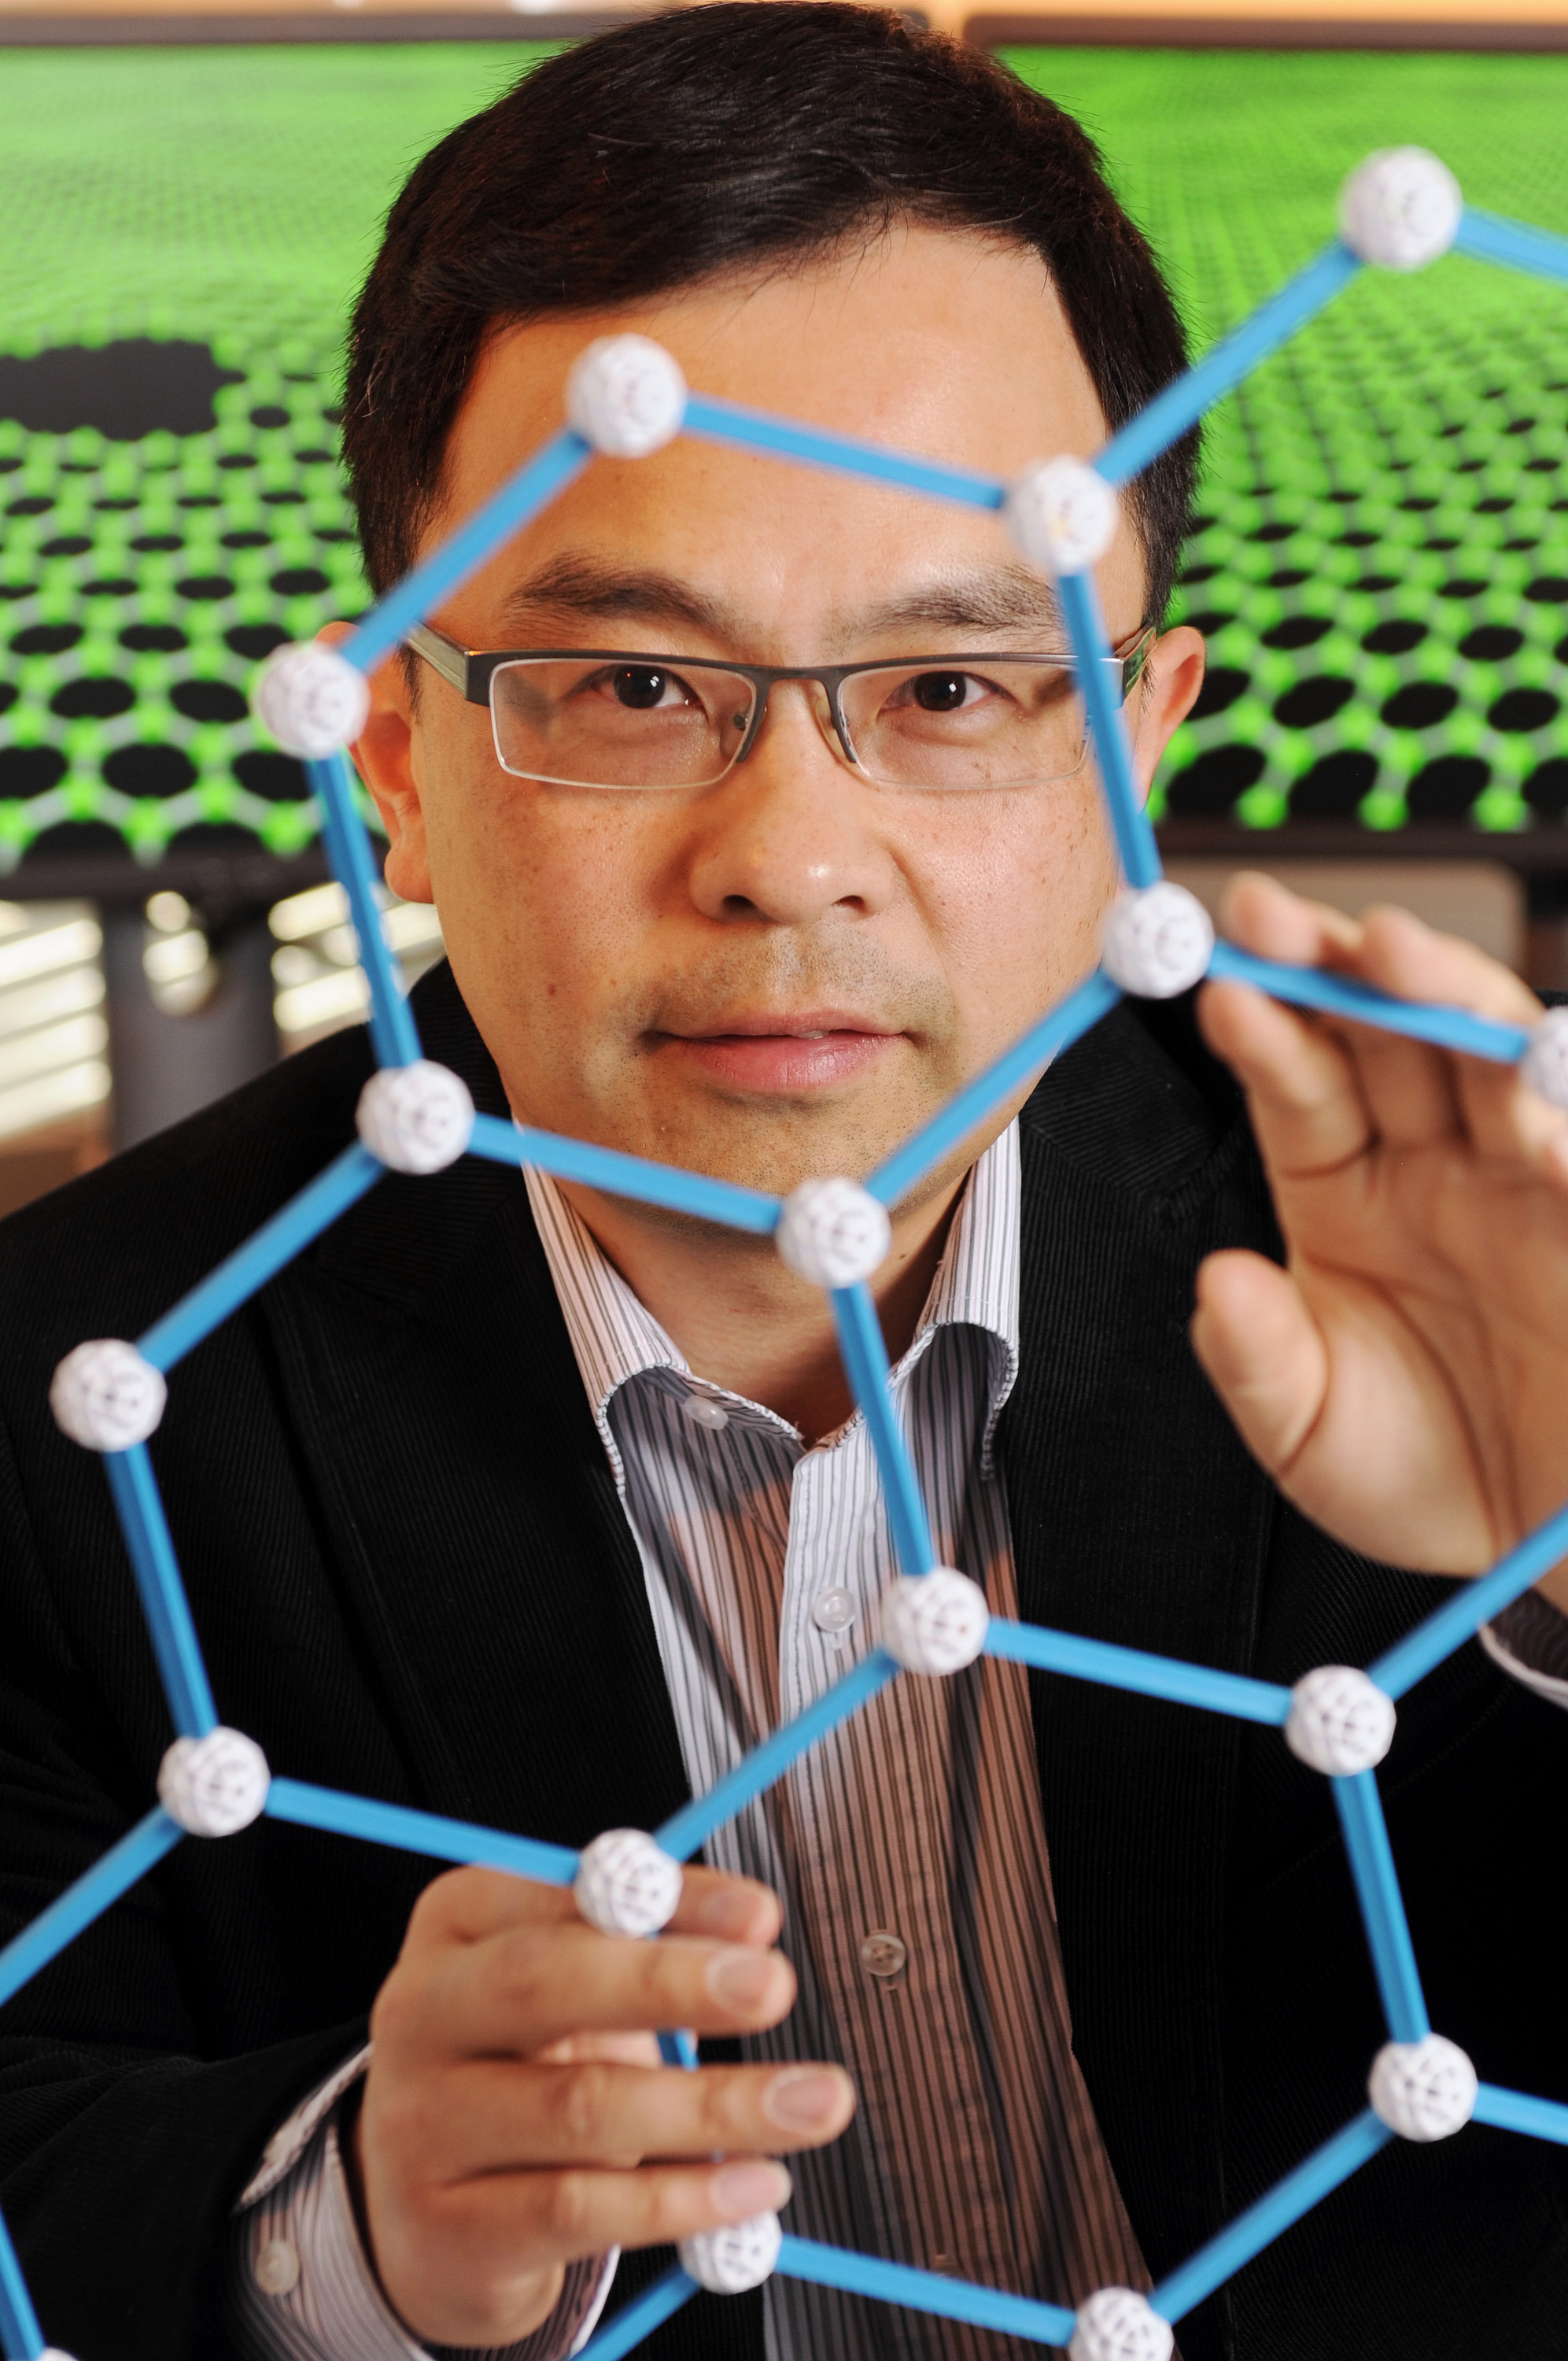 Ting Zhu an associate professor in the George W. Woodruff School of Mechanical Engineering at Georgia Tech, is shown with a model of the graphene structure. Georgia Tech's calculations and physical experiments at Rice University led to the conclusion that graphene, the one-atom layer of carbon, is only as strong as its weakest link. (Georgia Tech Photo: Gary Meek)